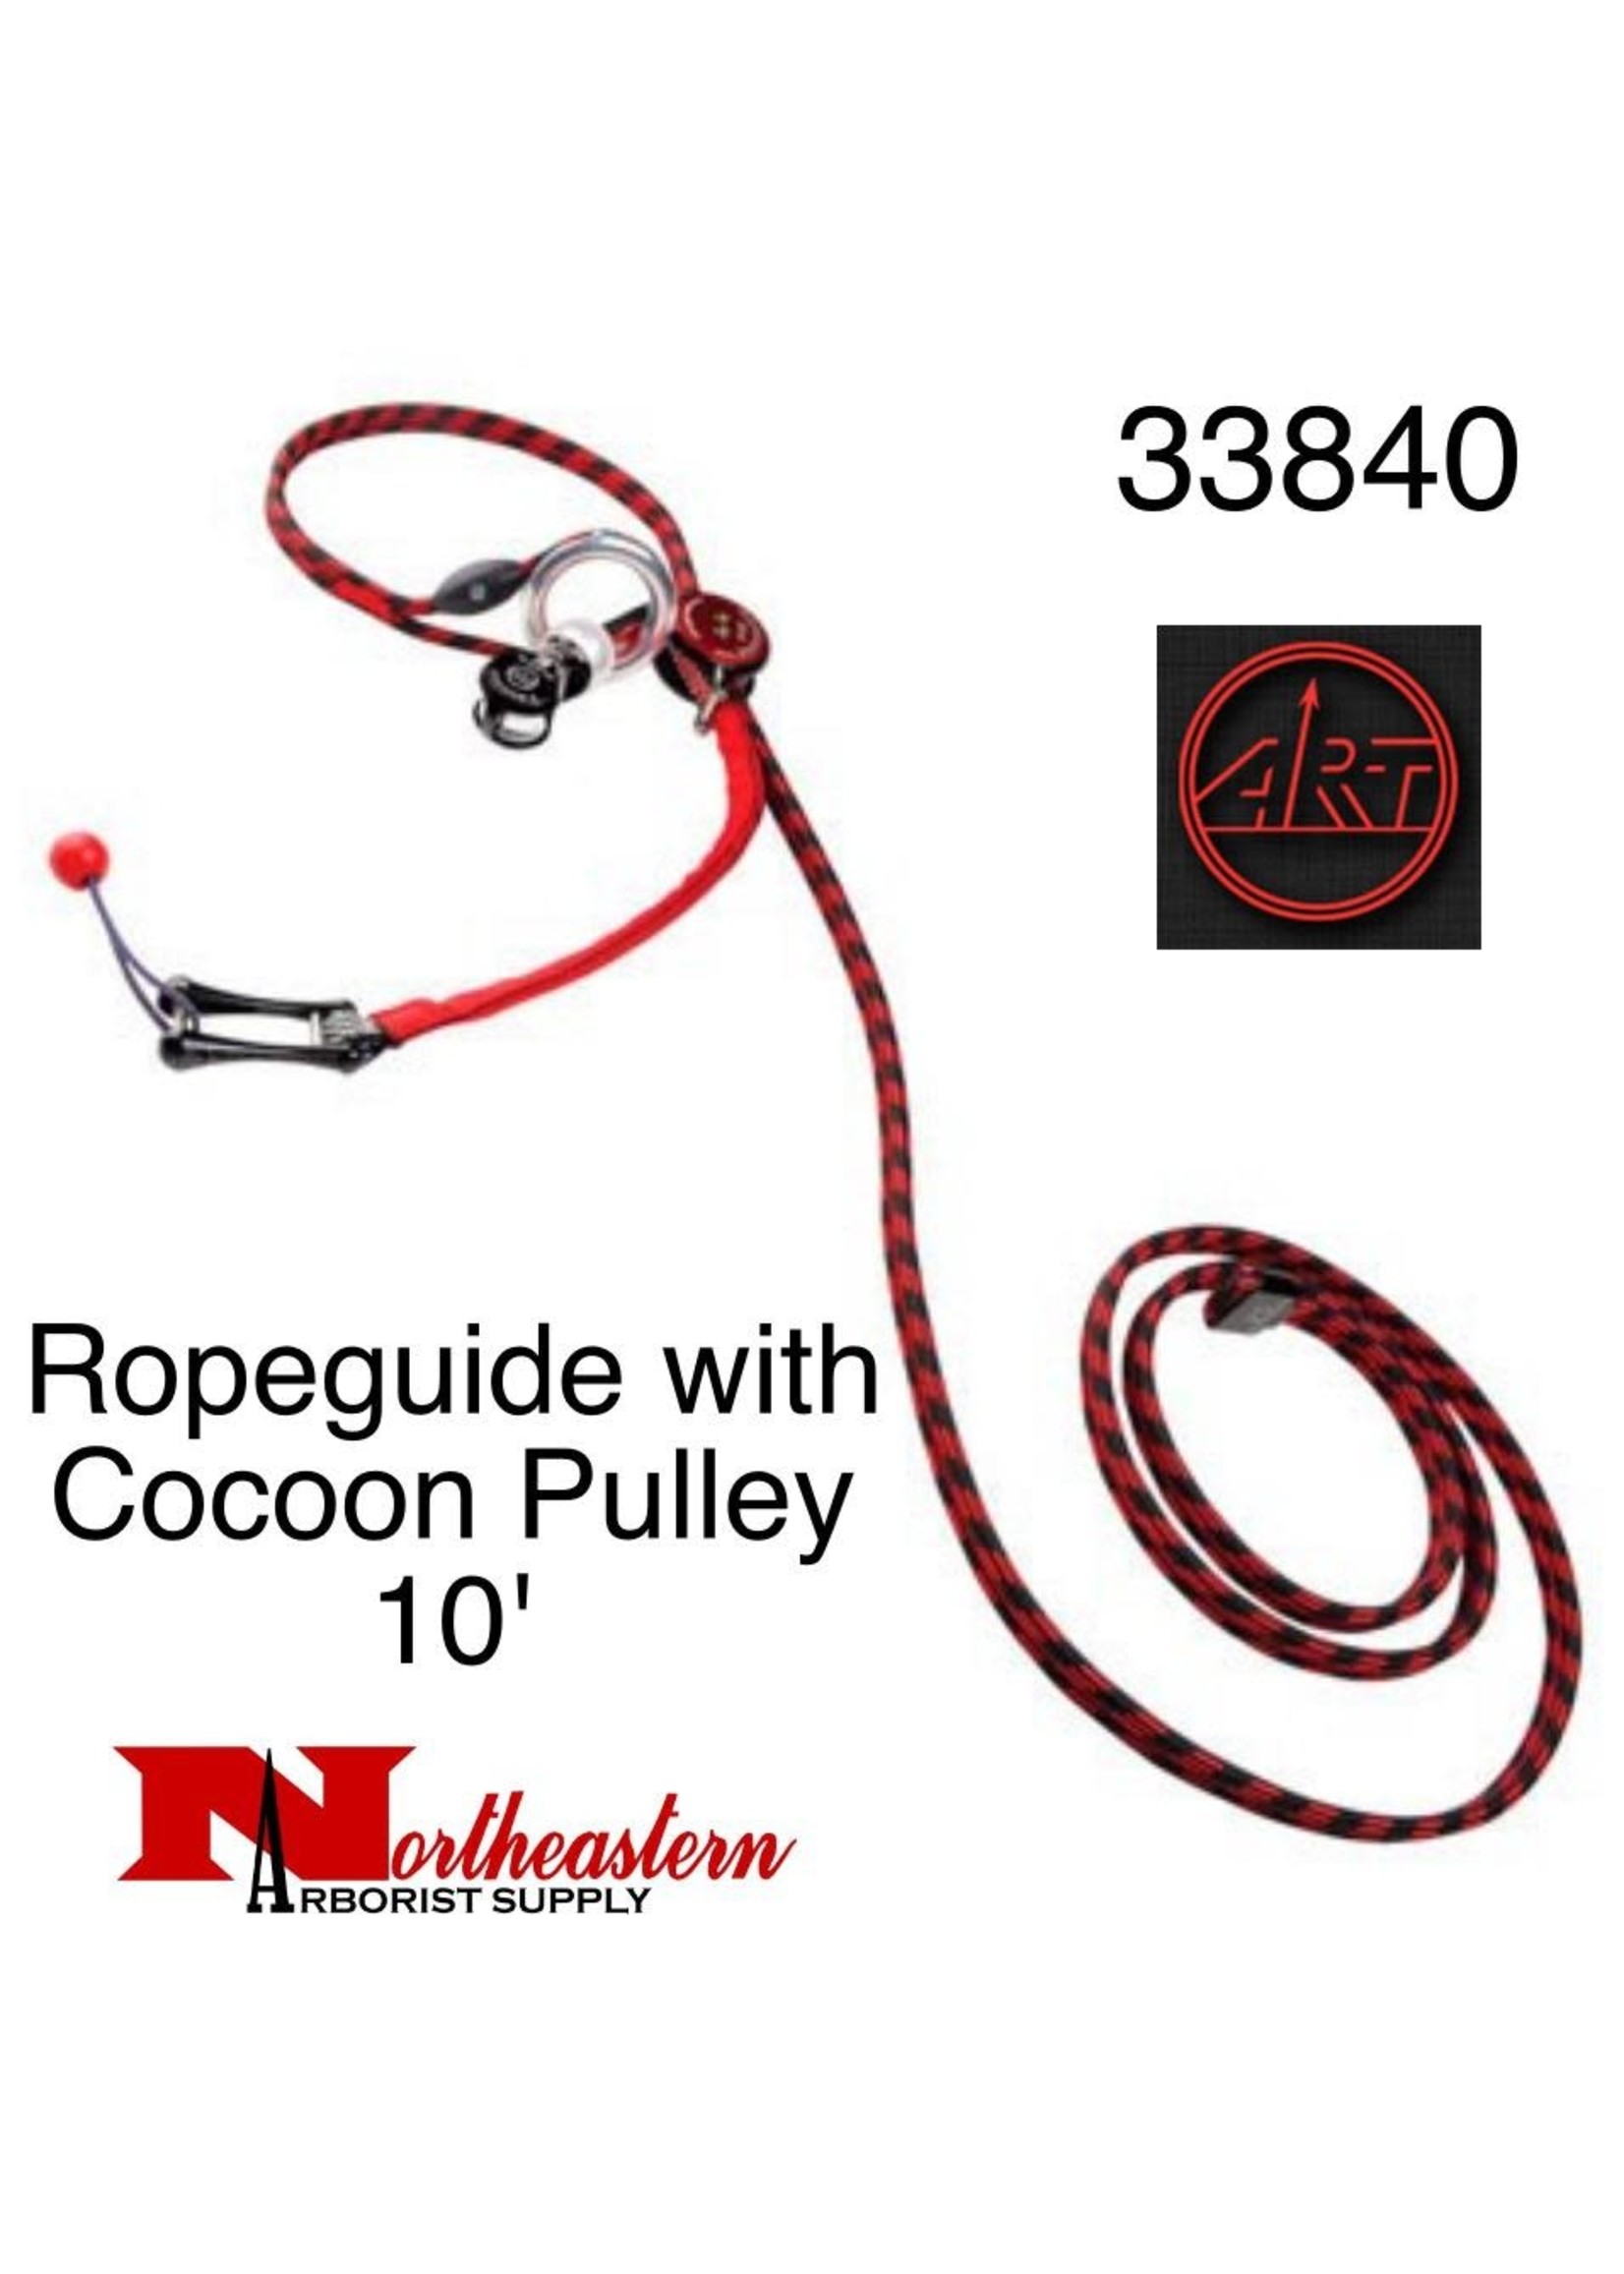 A.R.T. Ropeguide with Cocoon Pulley 10' Webbing